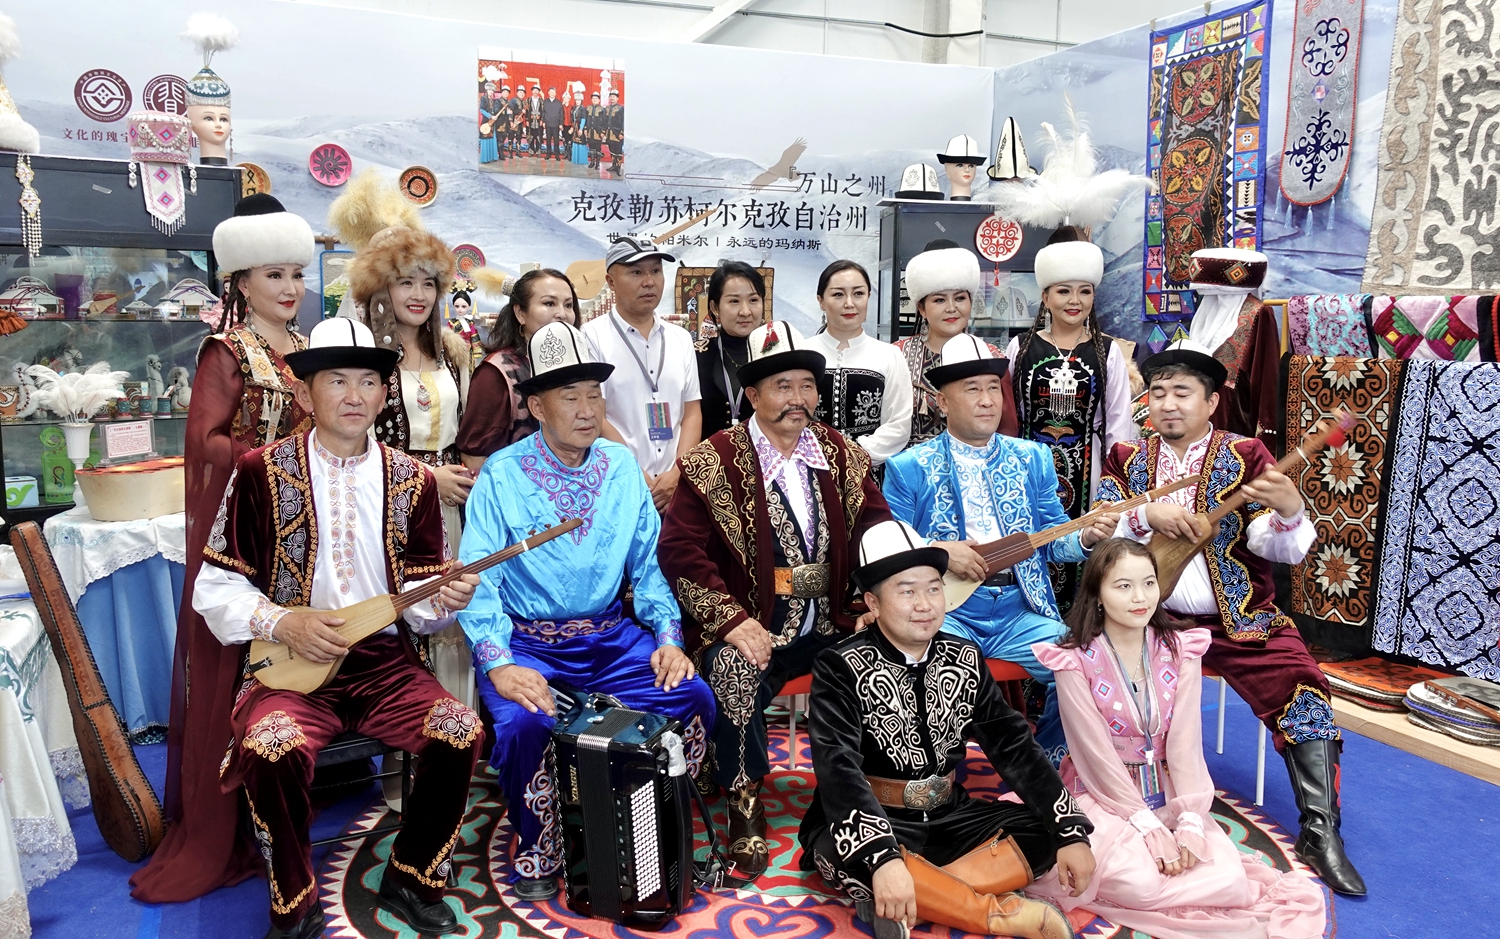 This group photo shows performers from Kizilsu Kyrgyz Autonomous Prefecture of Xinjiang. /CGTN